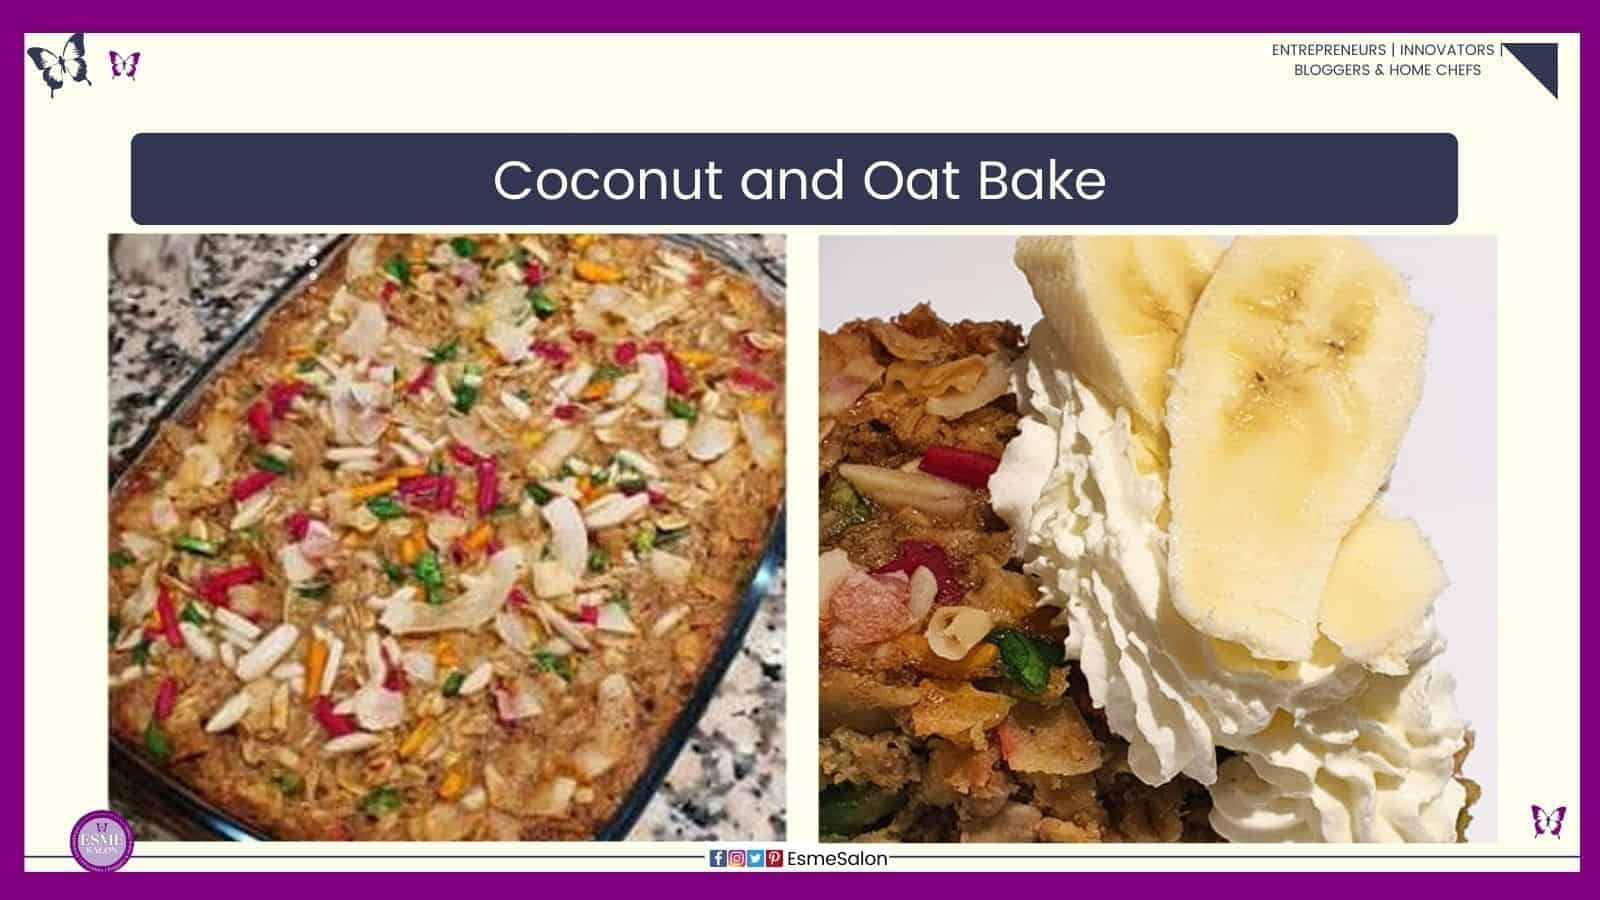 an image of a oblong dish with Coconut and Oat Bake as well as one plated with cream and banana slices